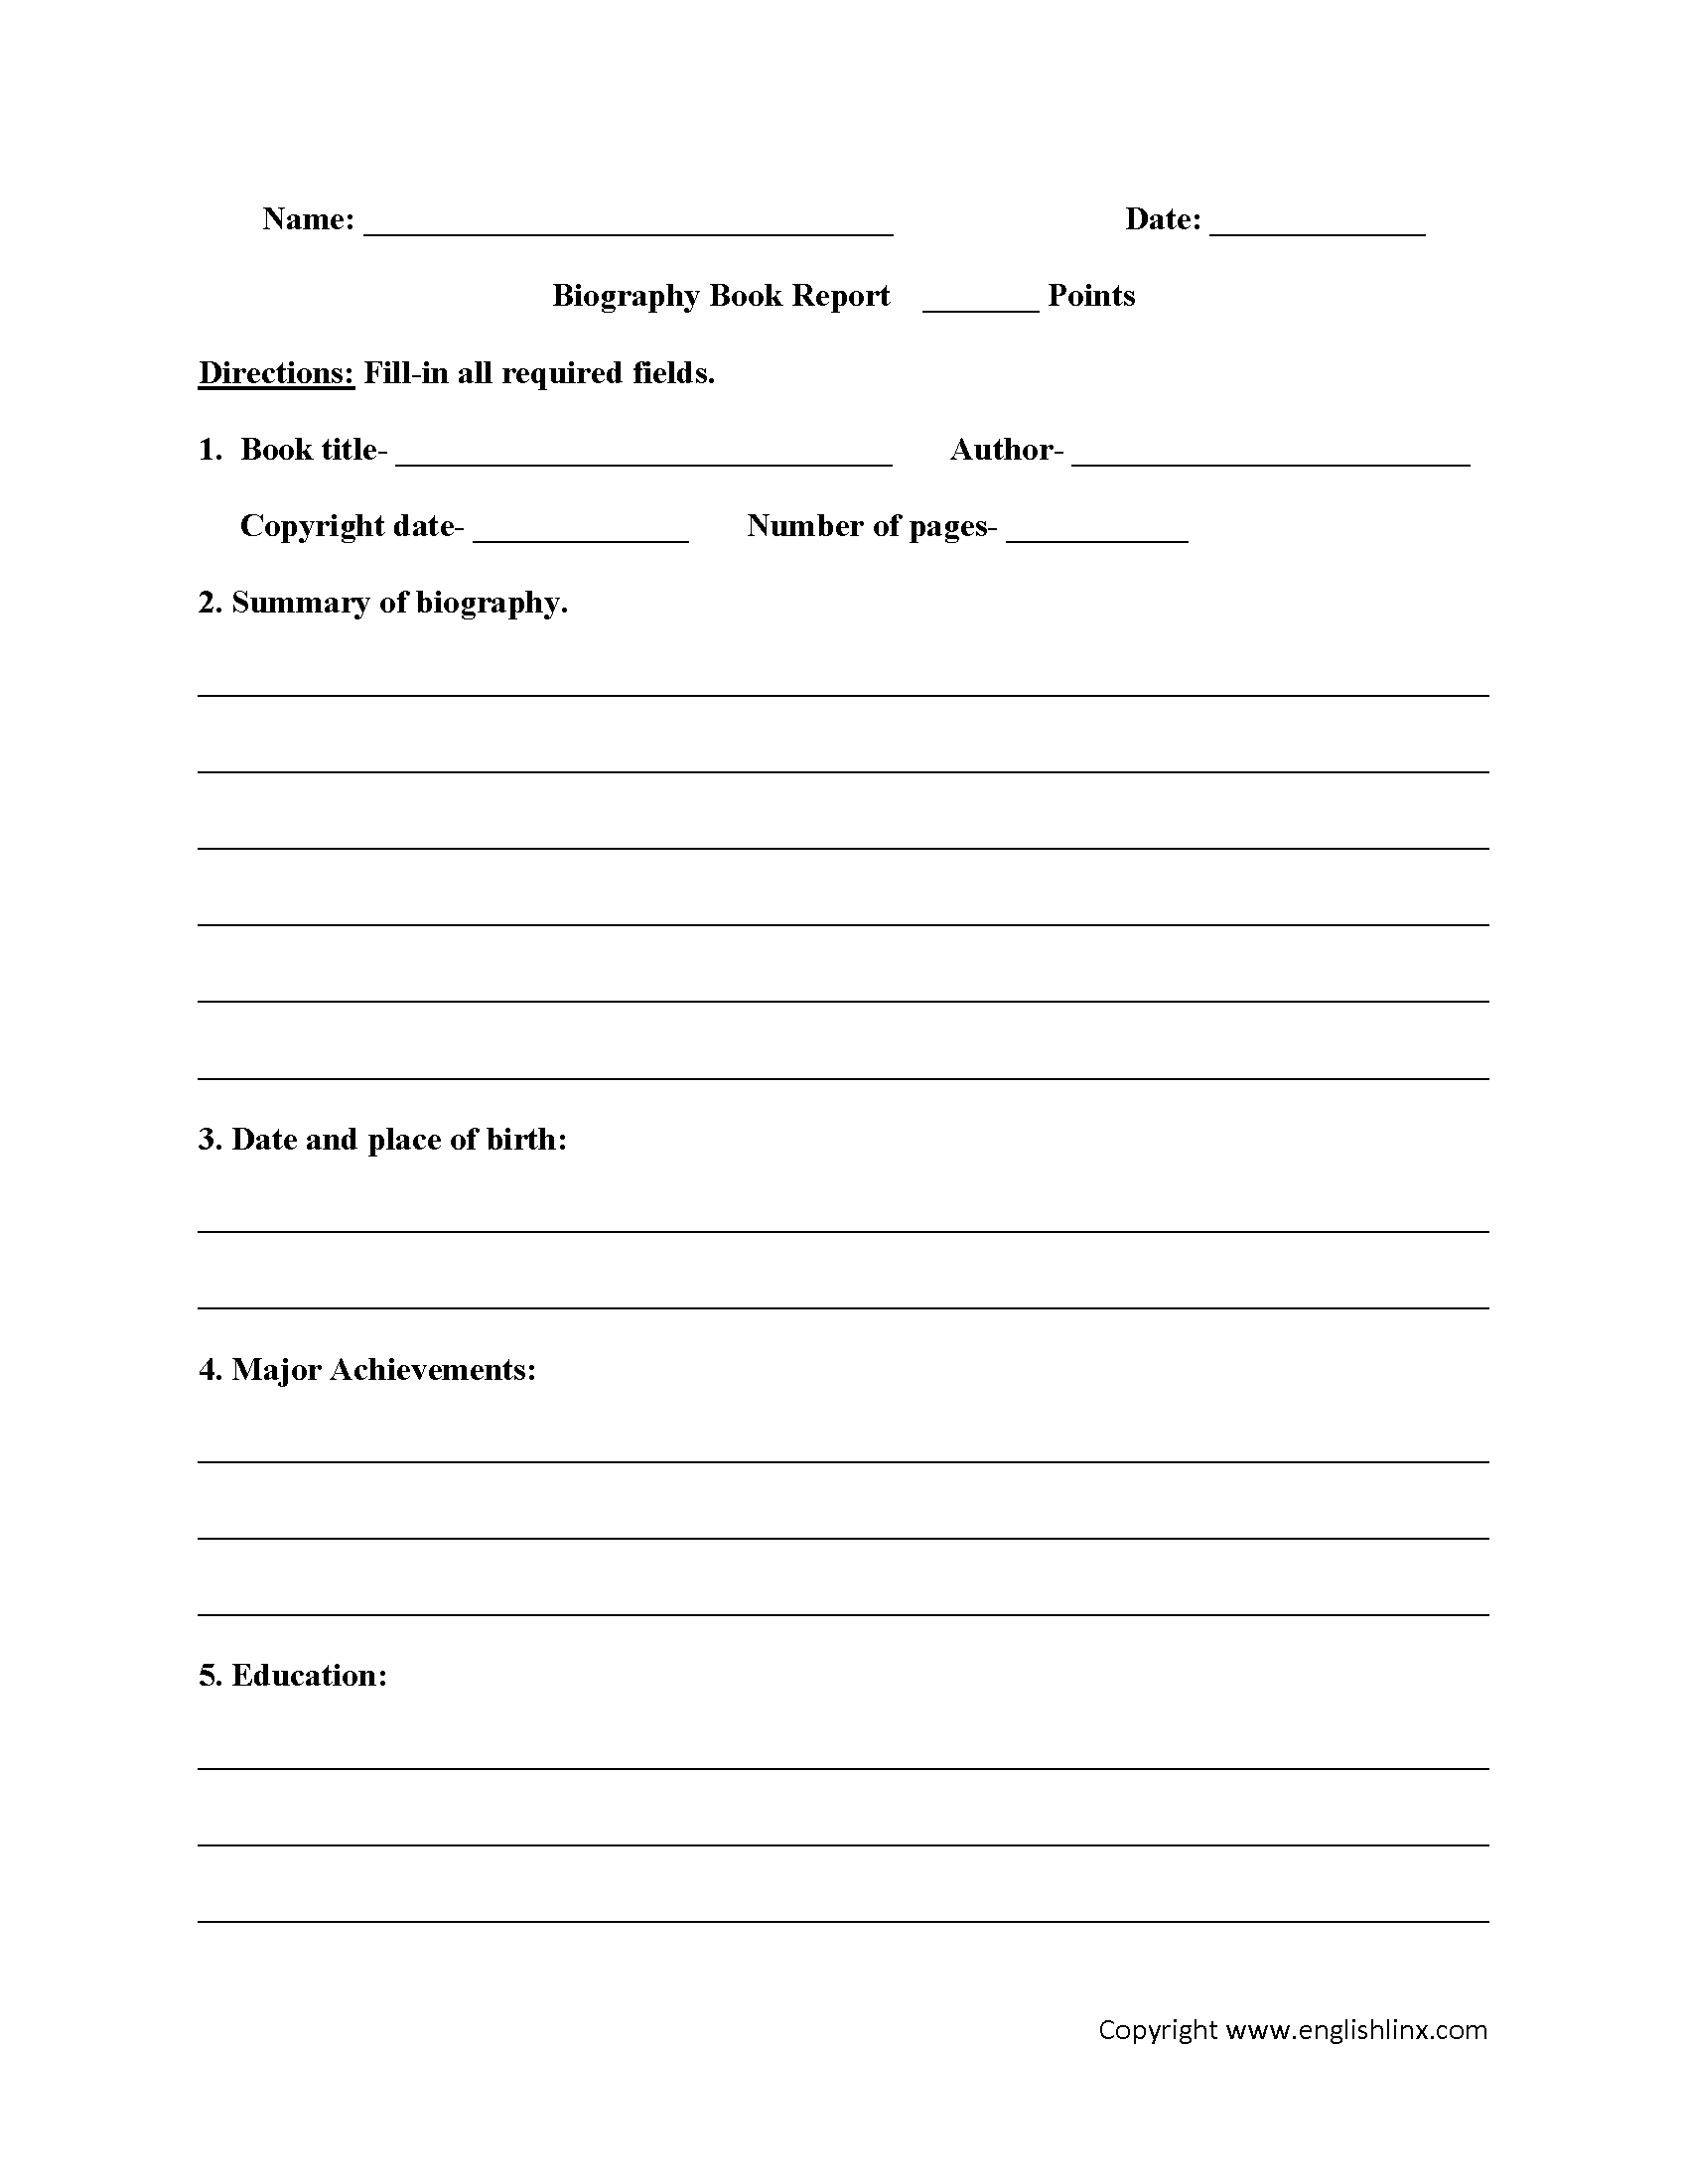 Englishlinx | Book Report Worksheets Intended For 2Nd Grade Book Report Template